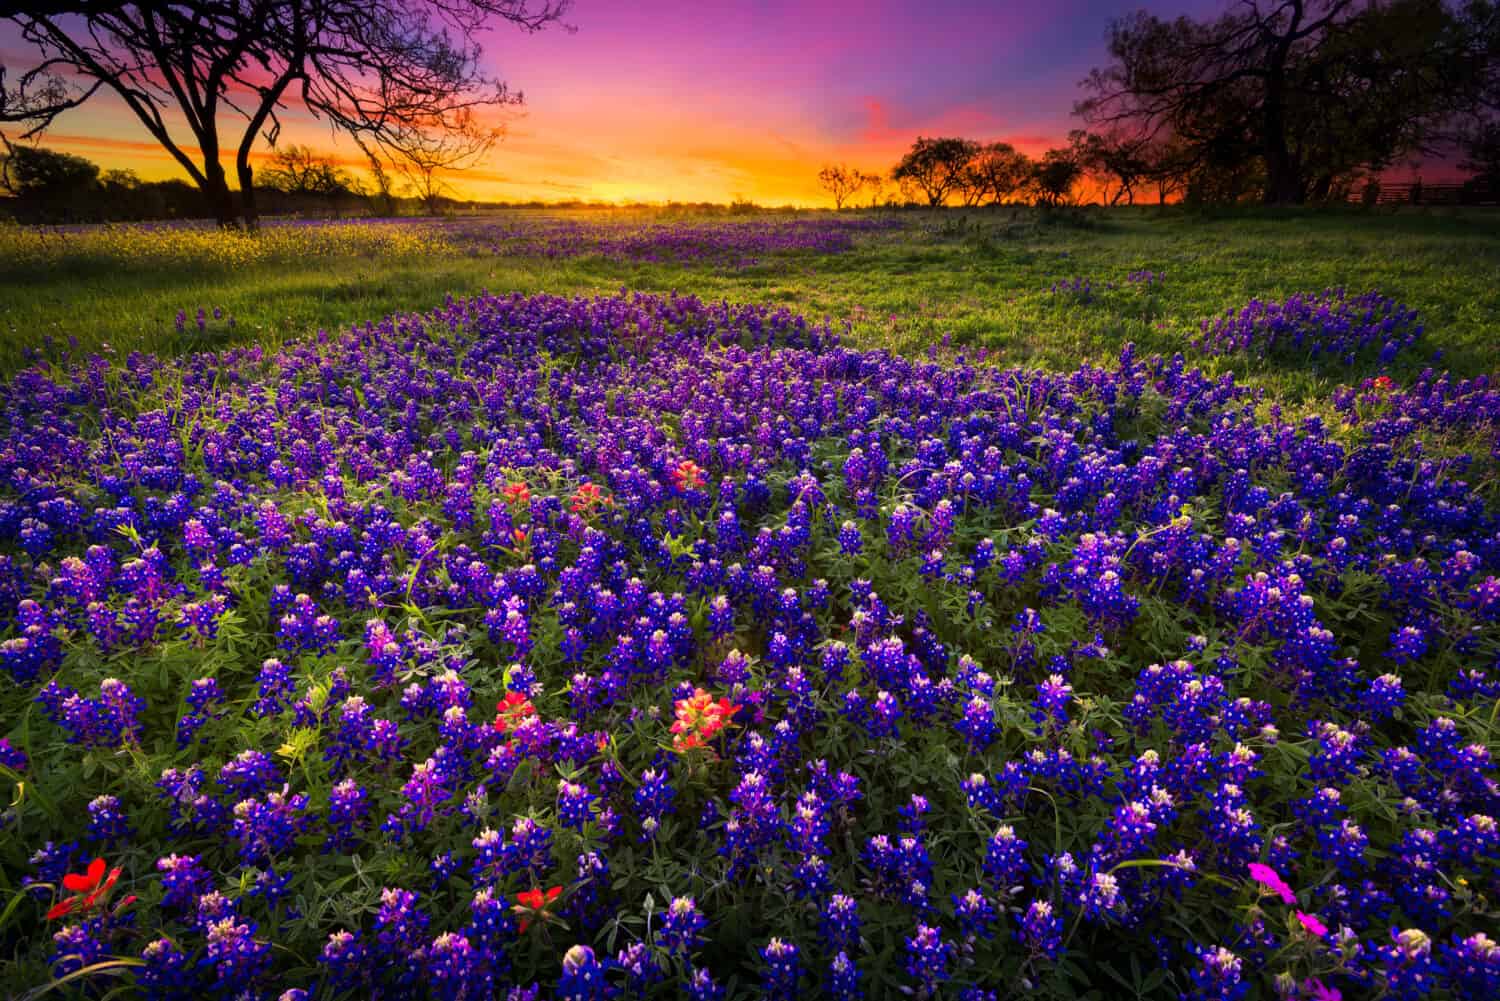 Dawn breaks over a field of bluebonnets and Indian paintbrushes near Fredericksburg, TX